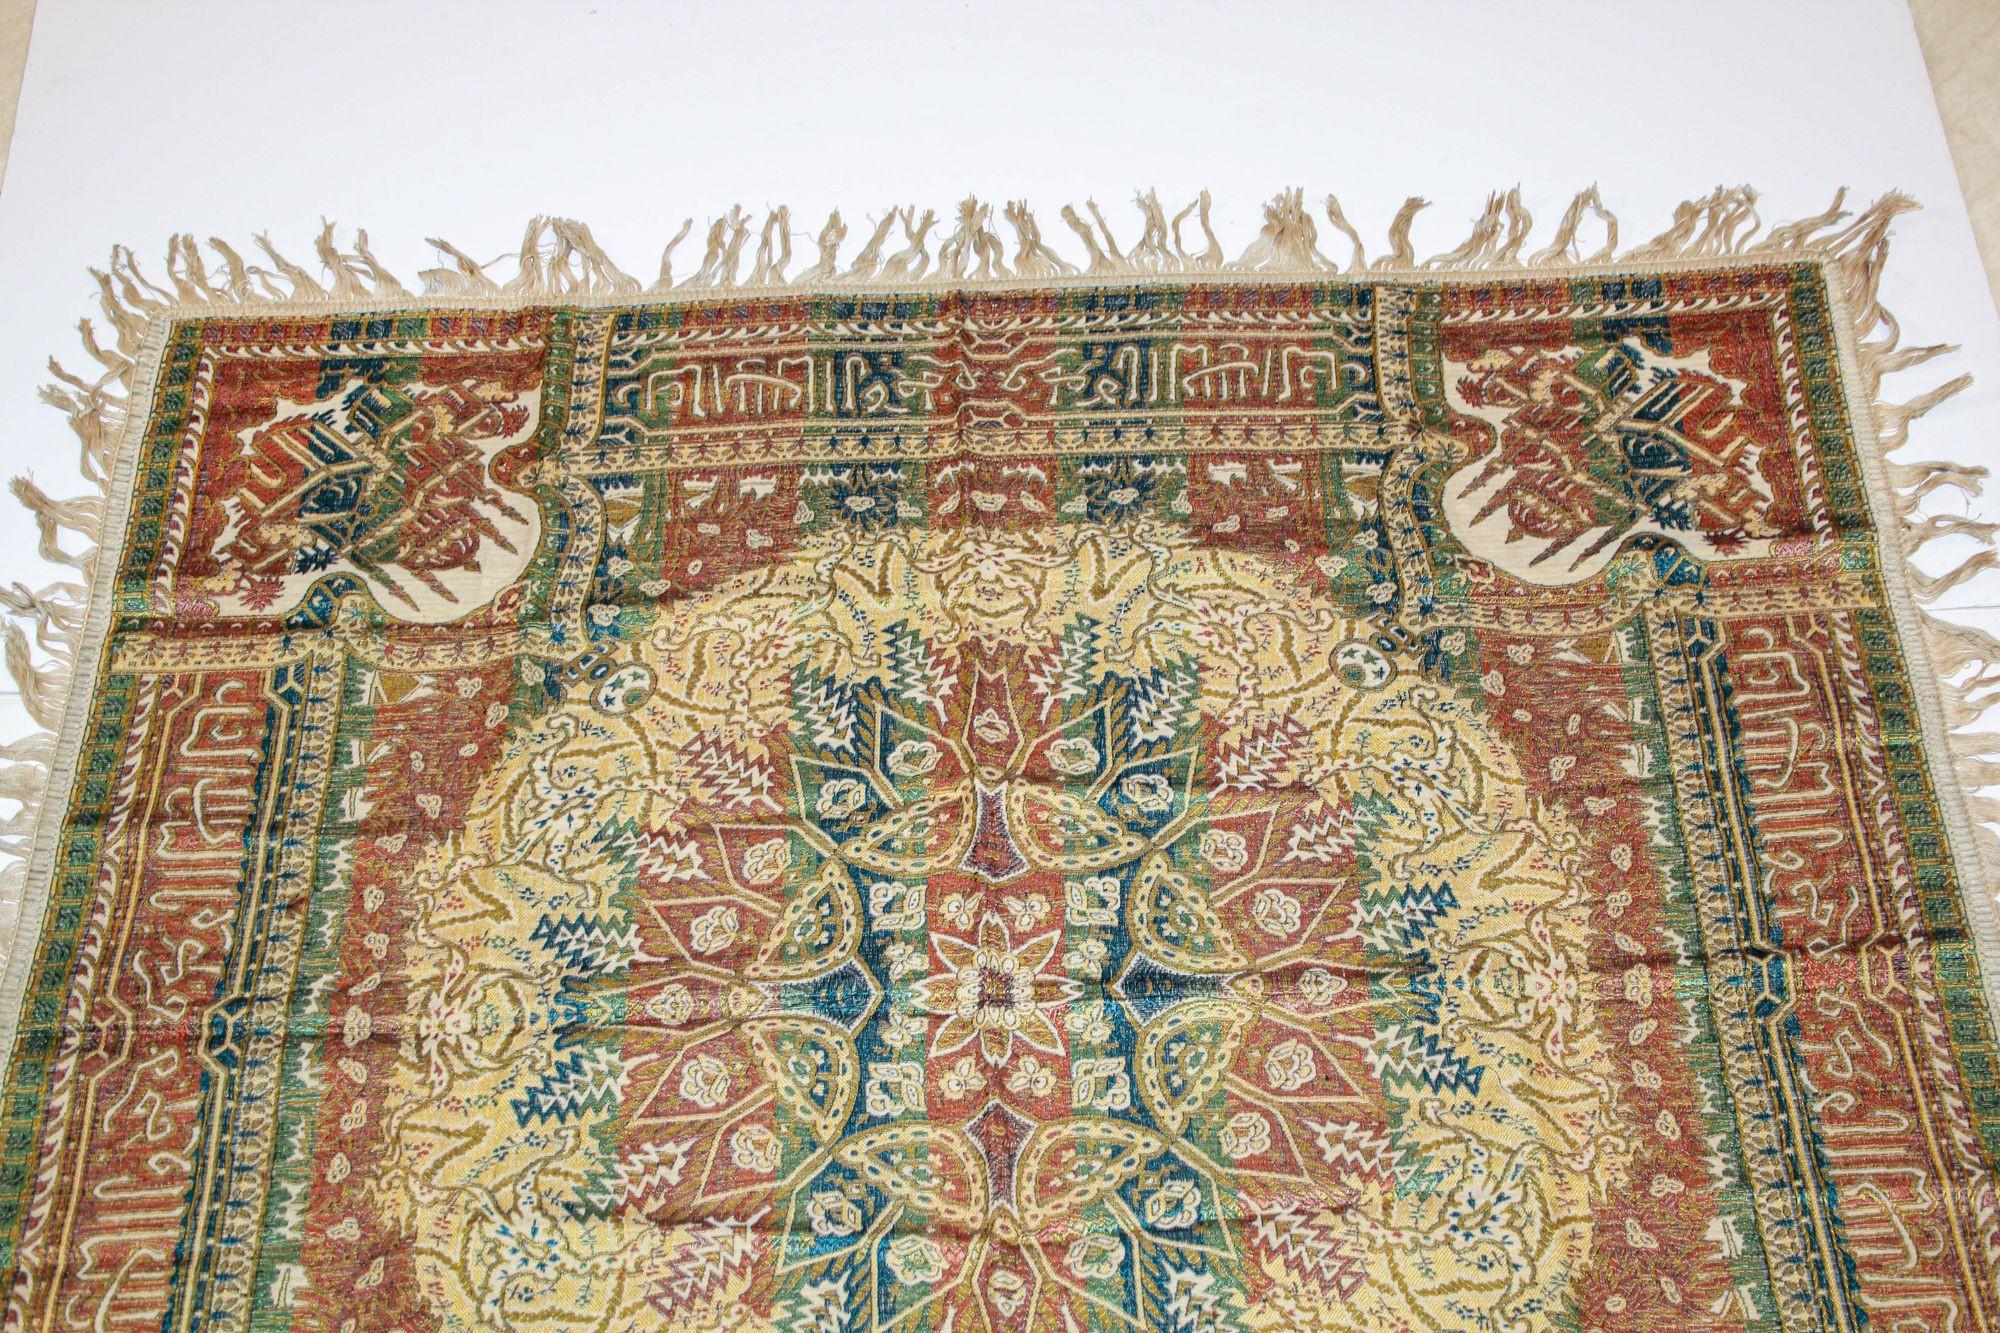 Cotton 1940s Granada Islamic Spain Textile with Arabic Calligraphy Writing For Sale